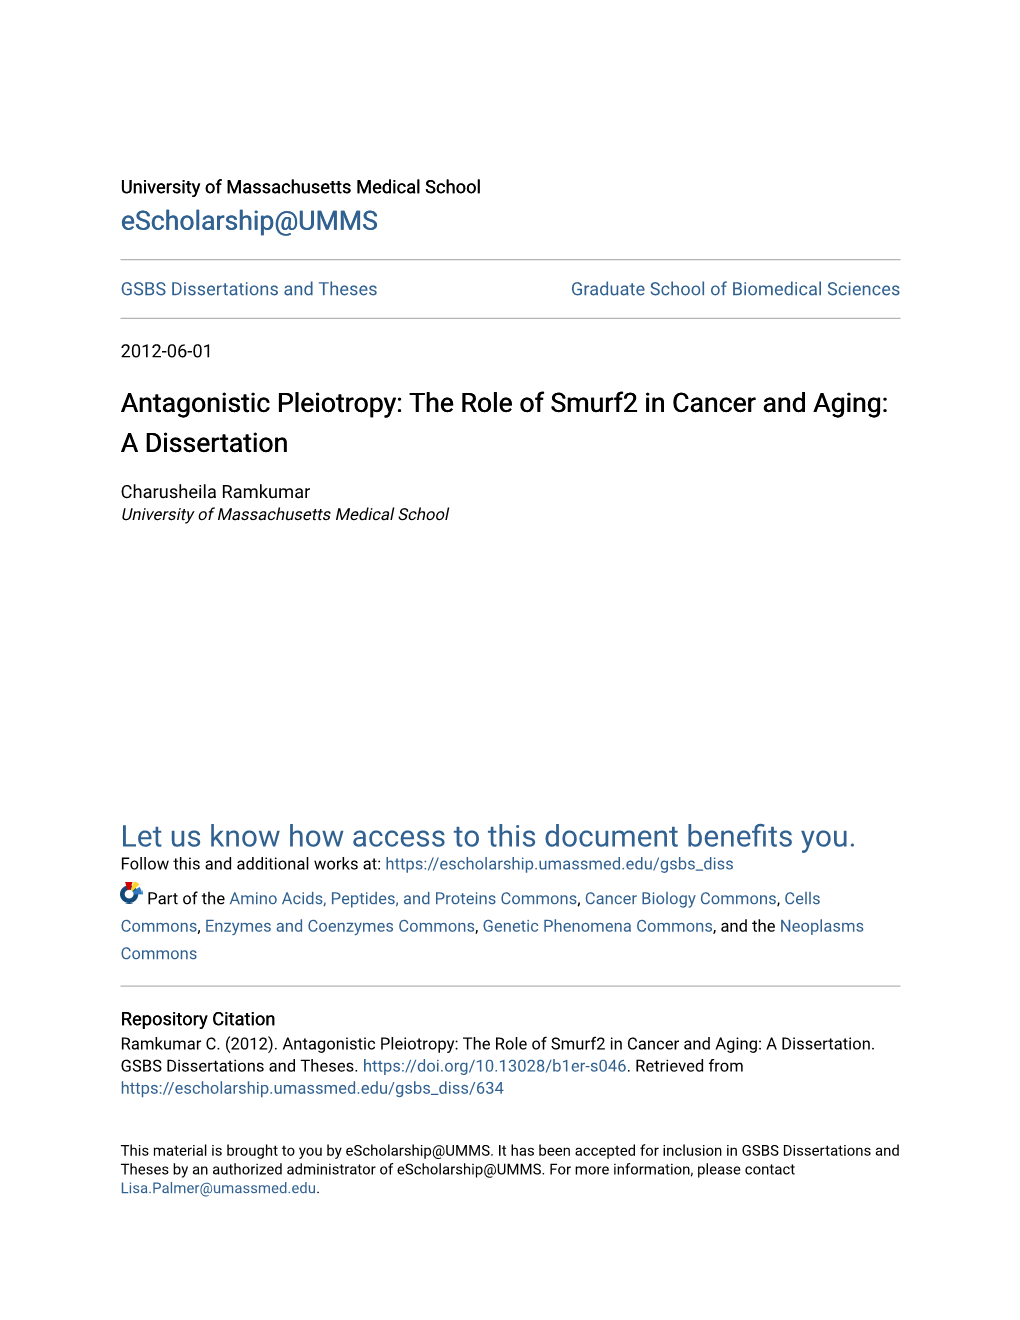 Antagonistic Pleiotropy: the Role of Smurf2 in Cancer and Aging: a Dissertation